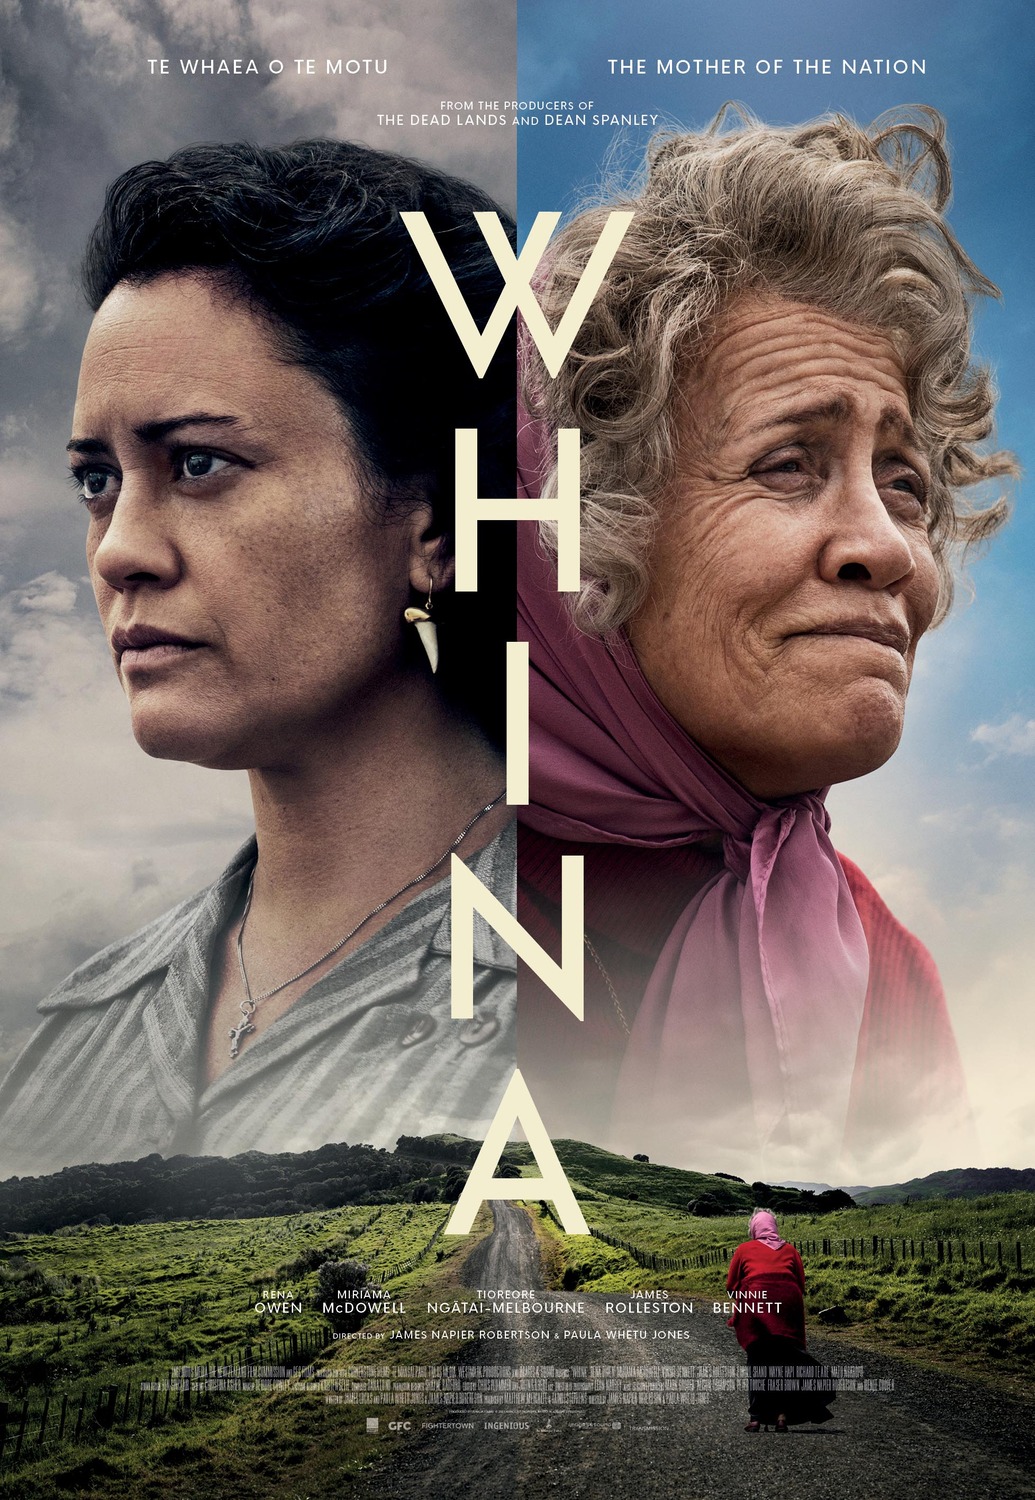 Extra Large Movie Poster Image for Whina 